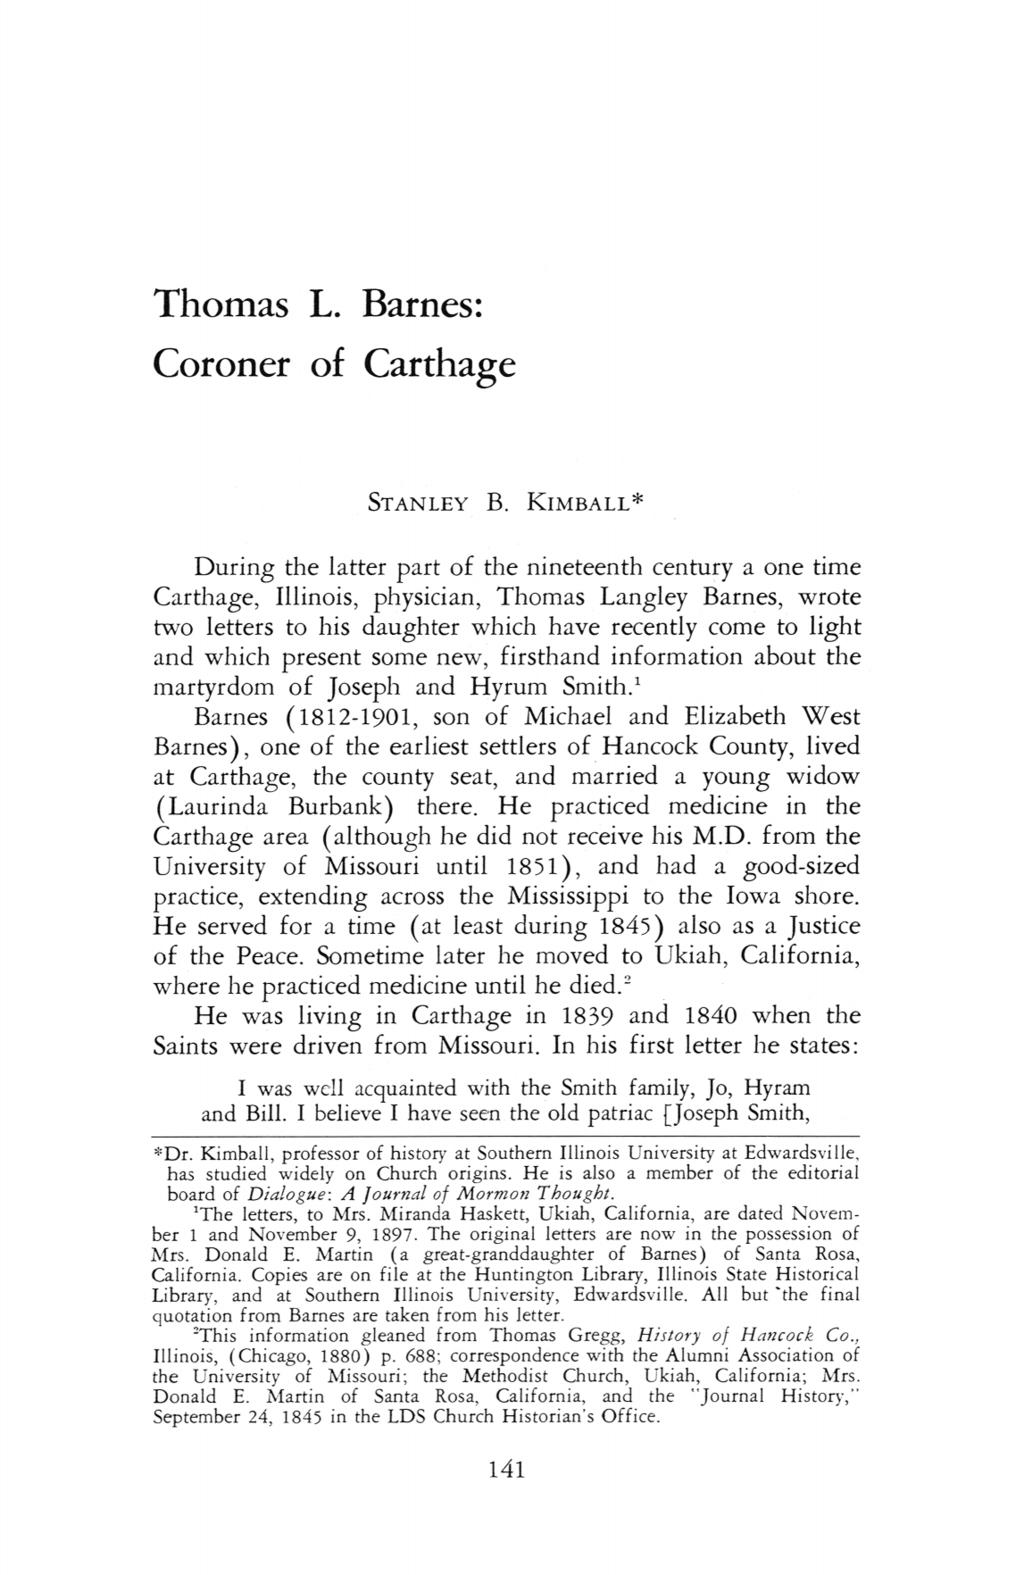 thomas L barnes coroner of carthage STANLEY B KIMBALL during the latter part of the nineteenth century a one time carthage illinois physician thomas langley barnes wrote two letters to his daughter